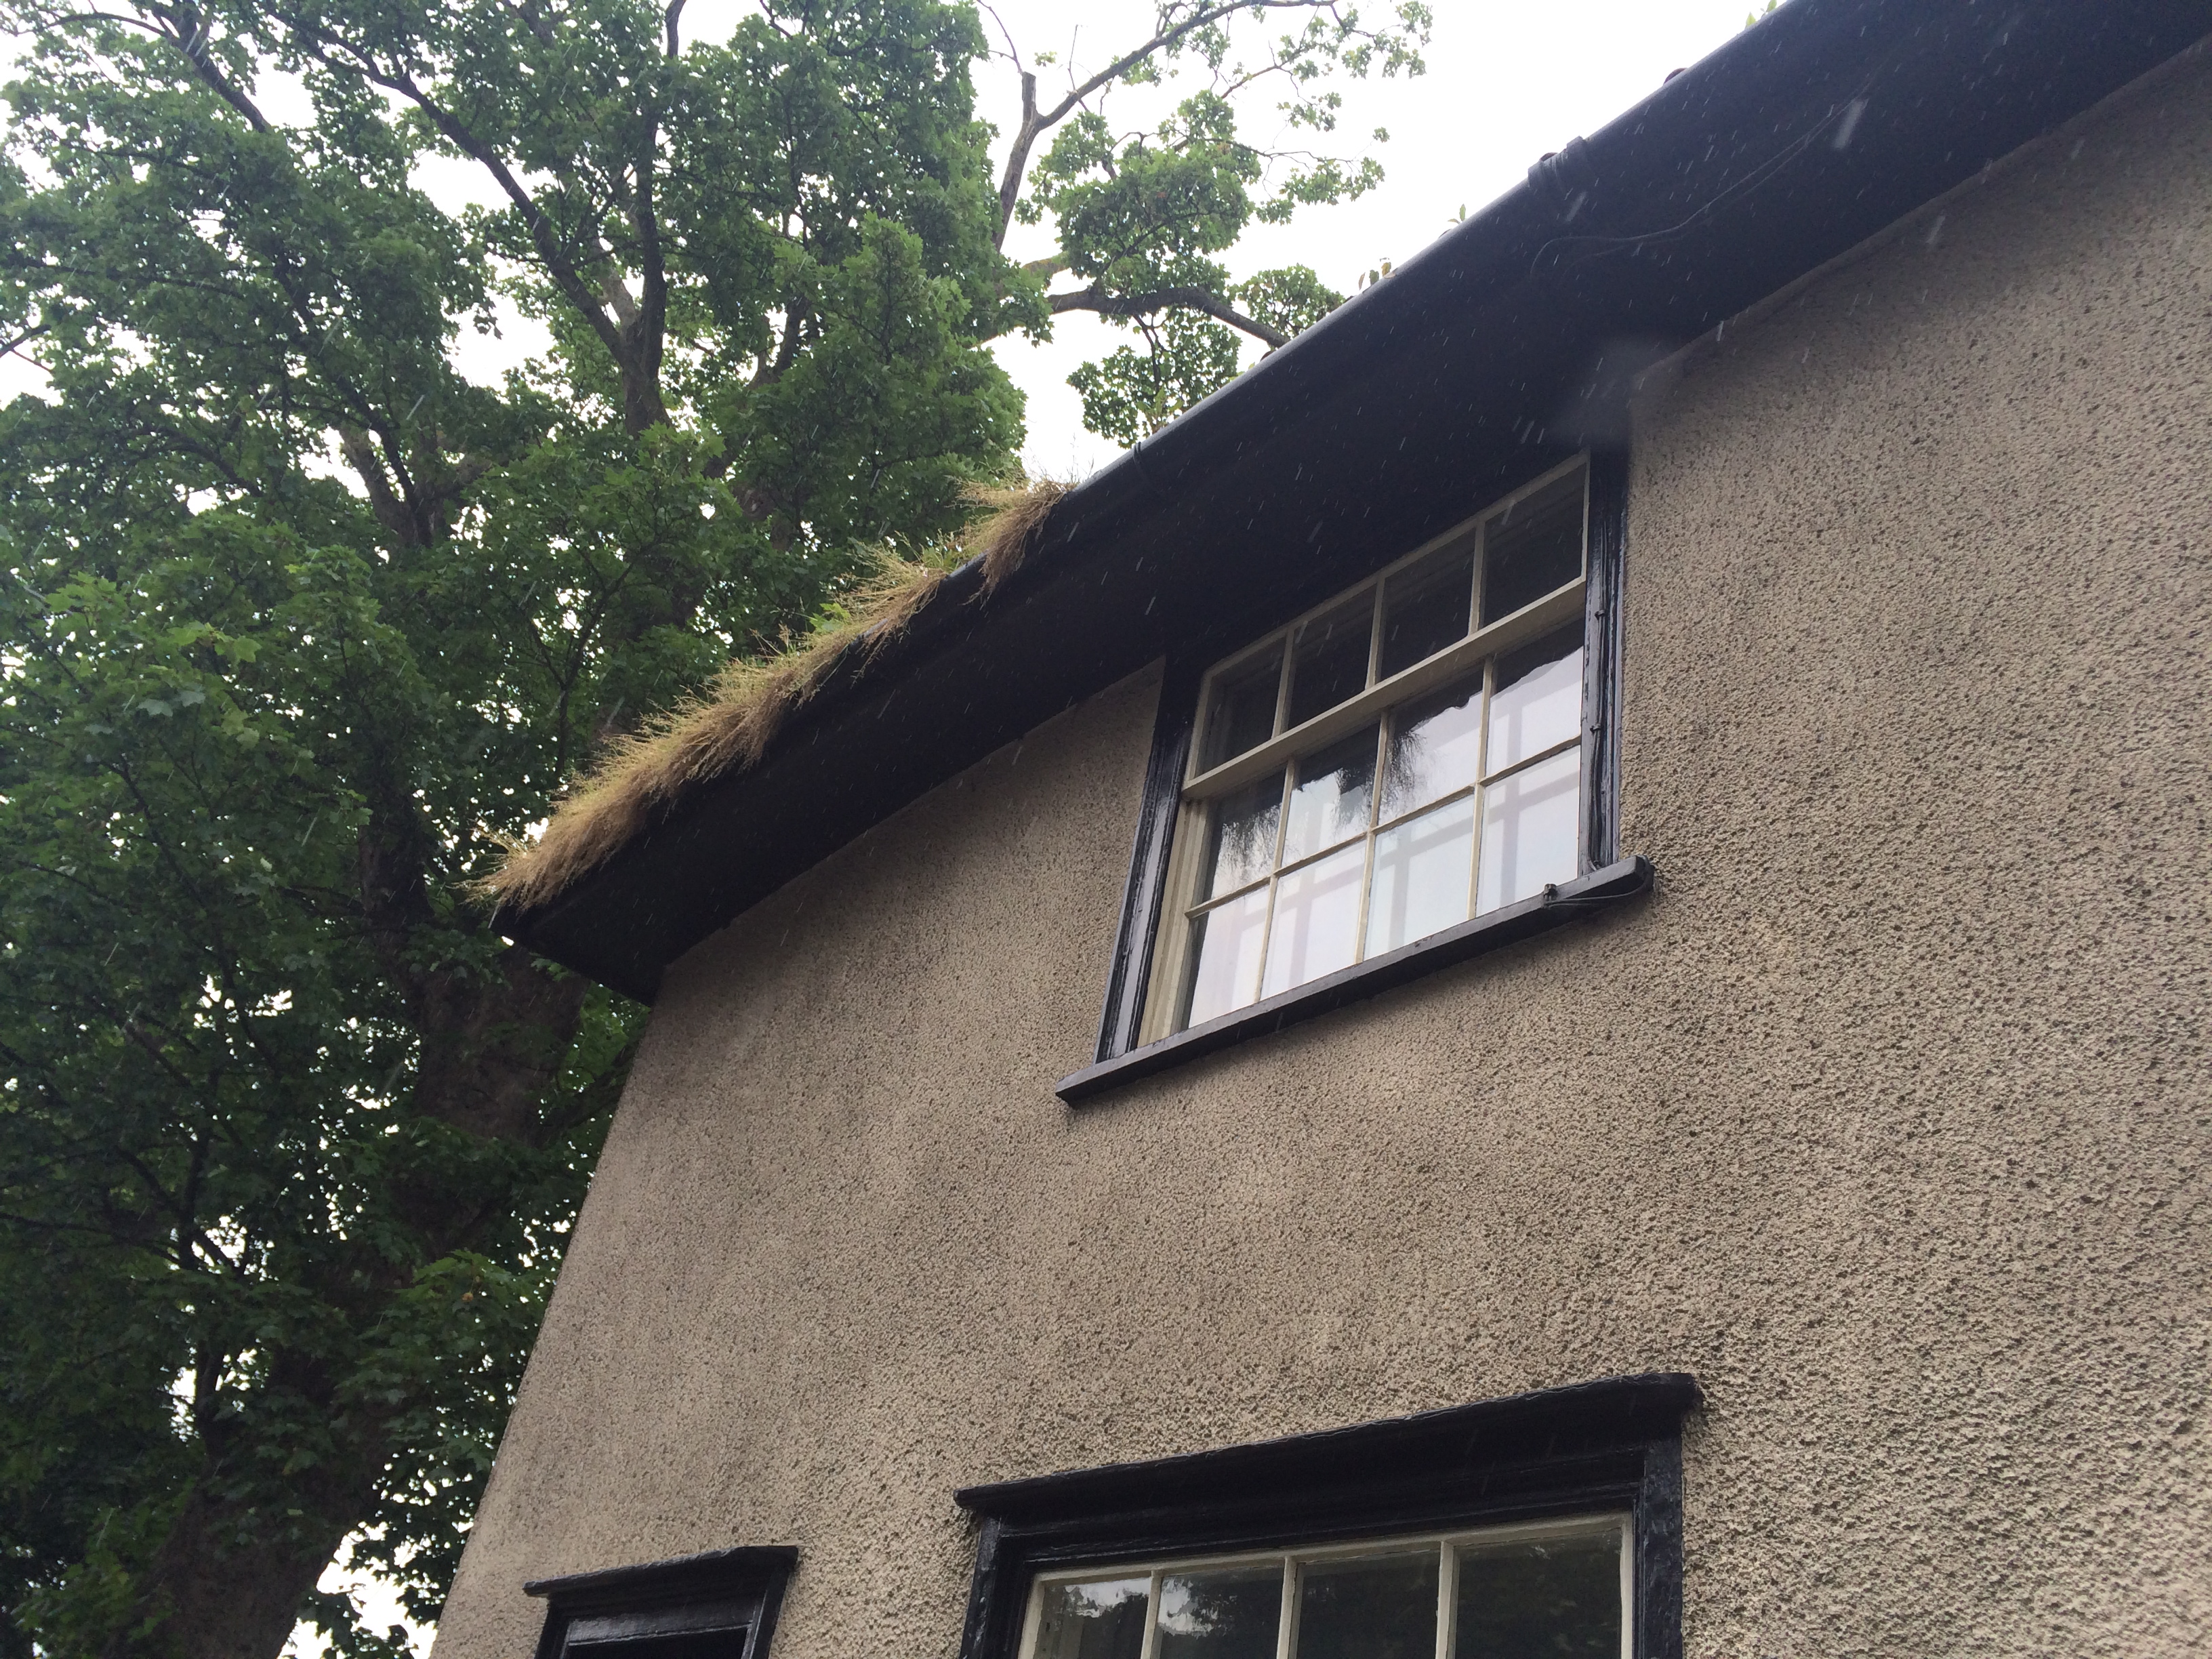 Gutter cleaning North Norfolk - house with weeds